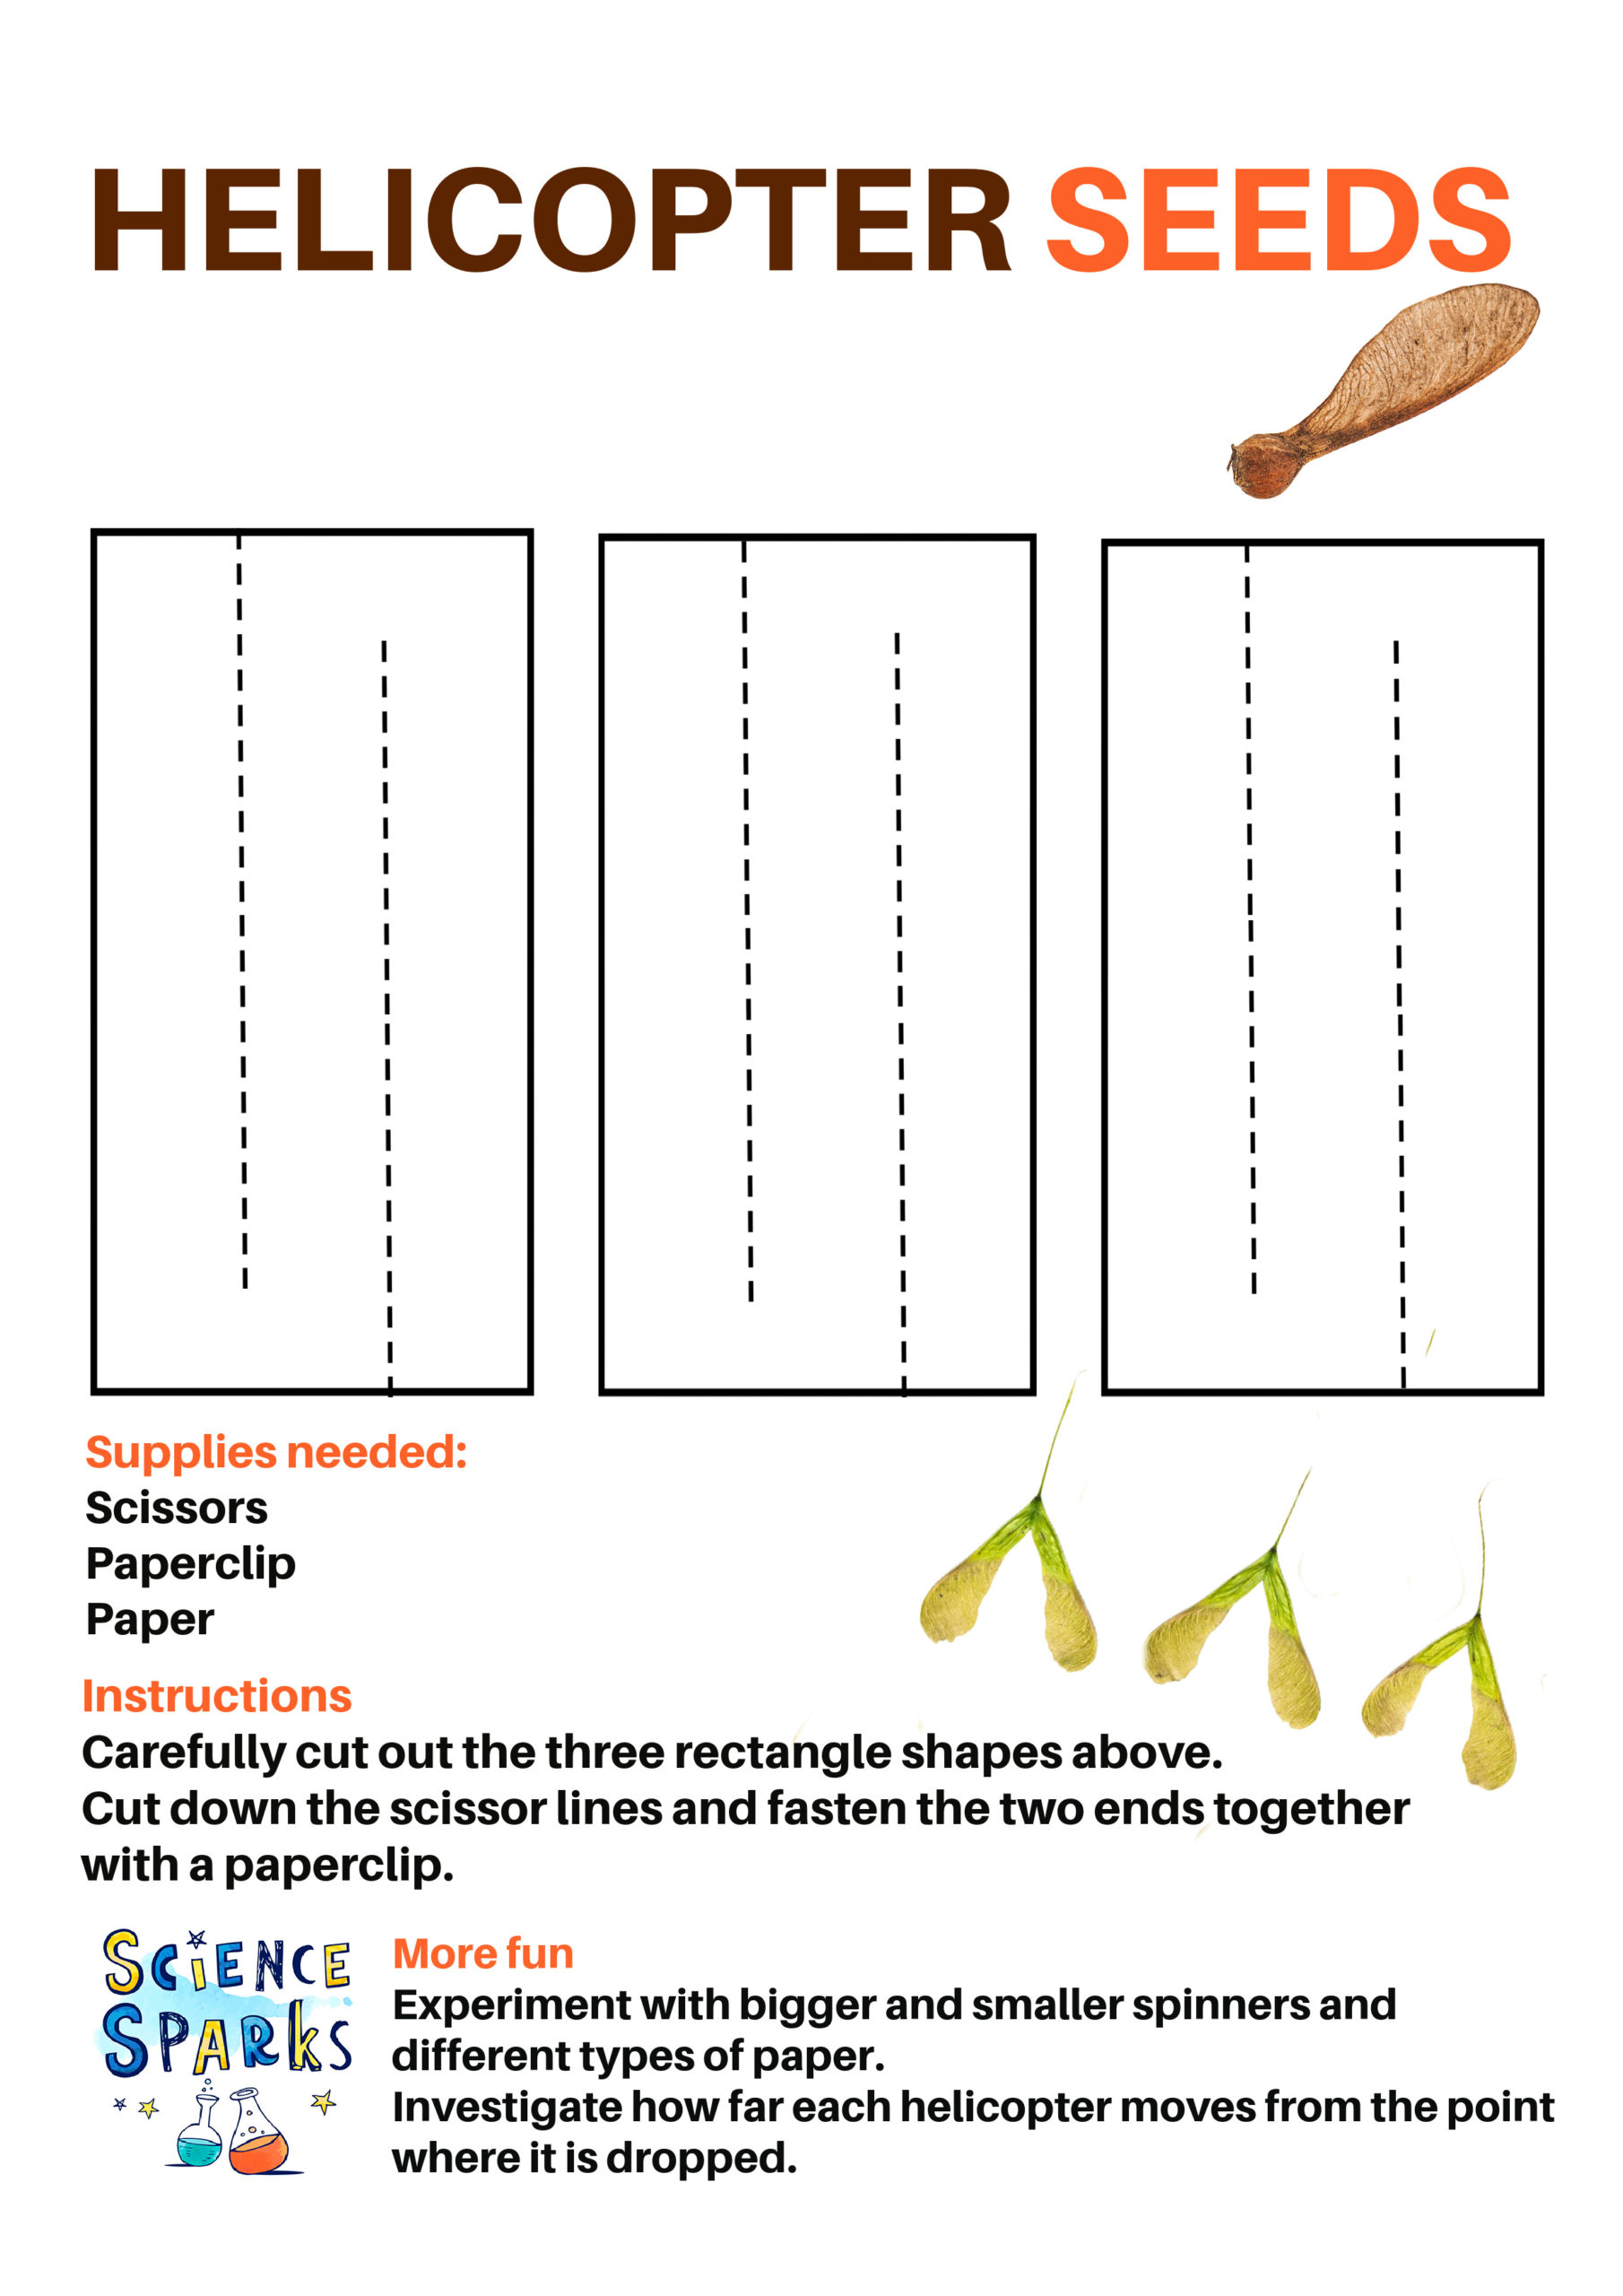 Instructions for a seed dispersal activity